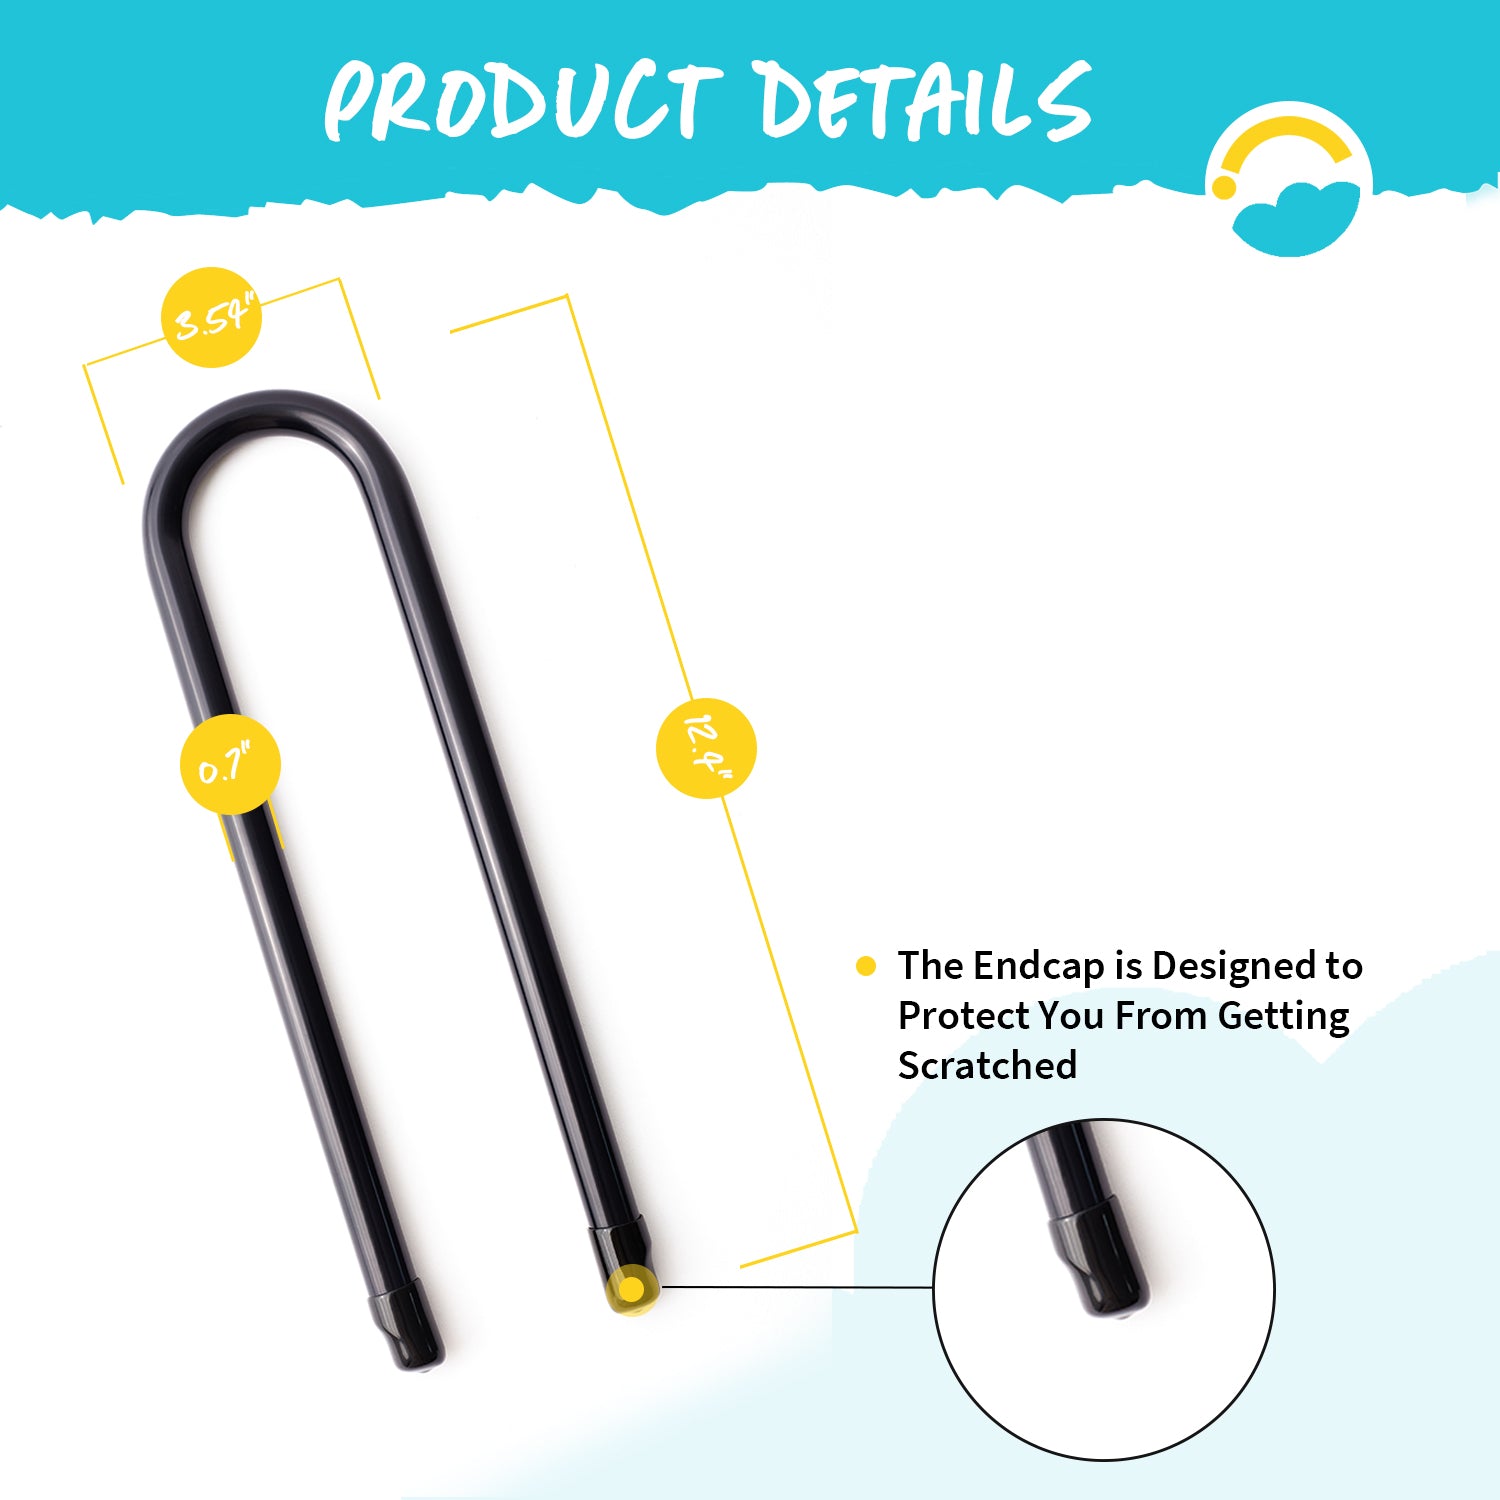 Product Details:  Height of U-Shaped Anchor 12.4", Length is 3.54", Thickness of U-Shape Anchor Kit is 0.7".  The Endcap is Designed to Protect You From Getting Scratched.  